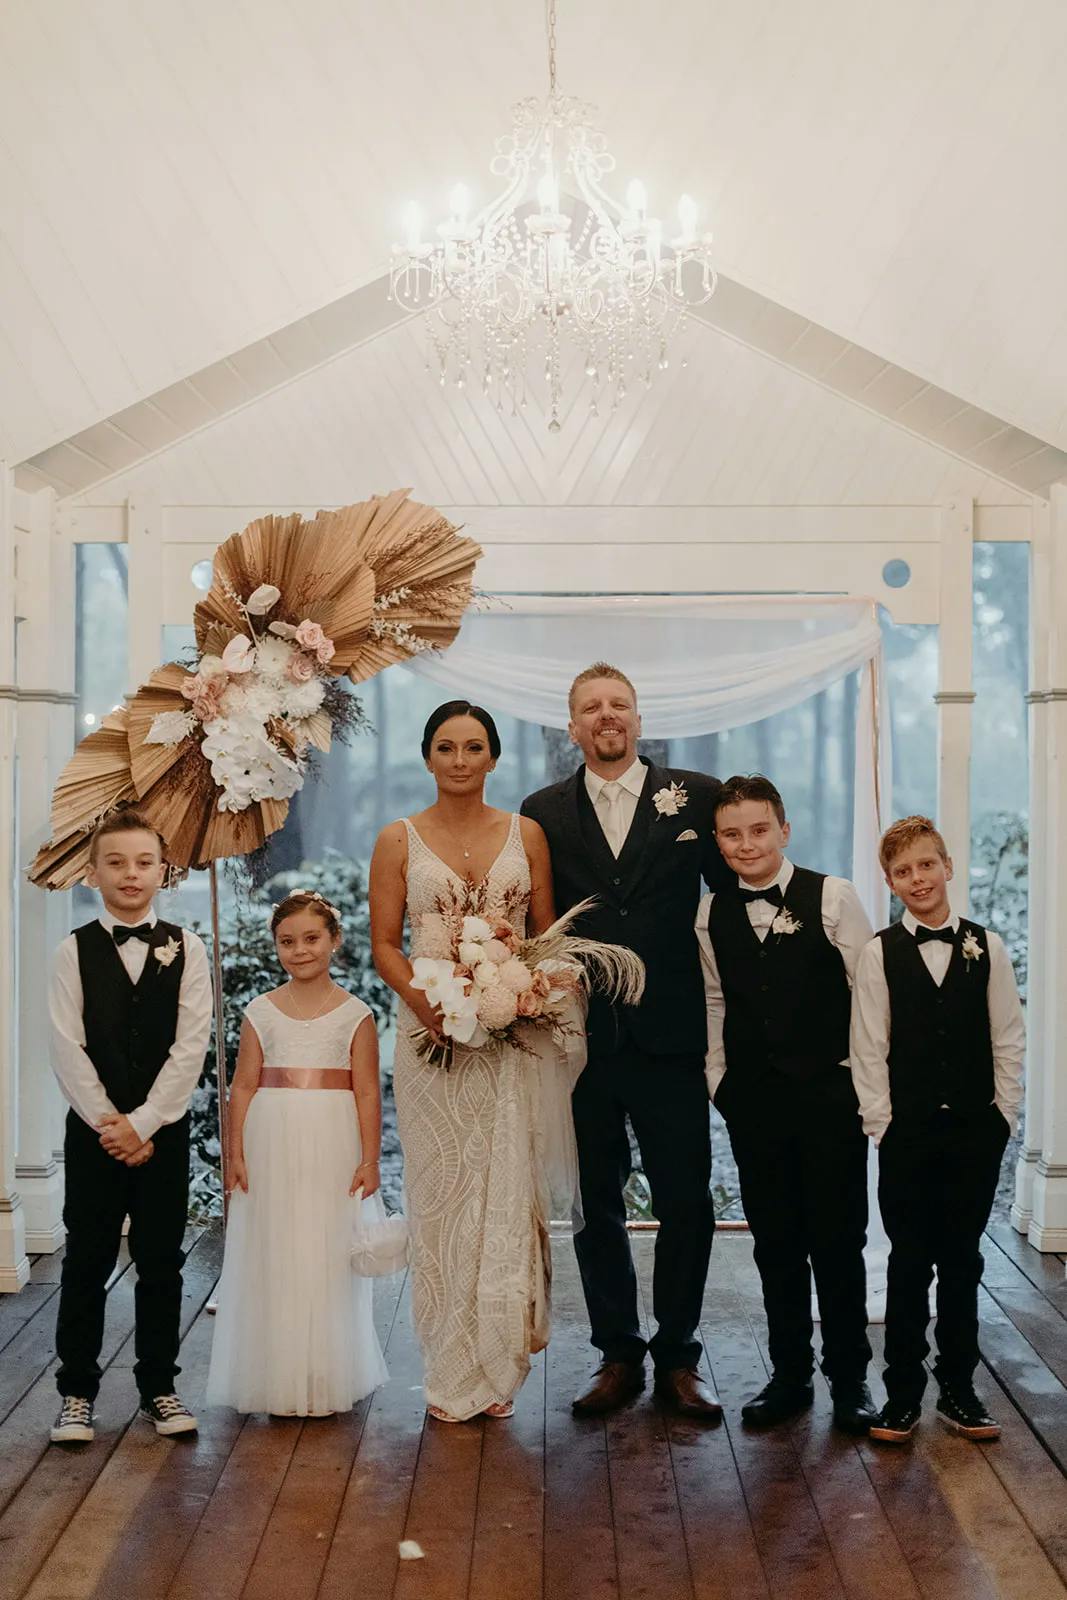 A bride and groom stand together under a chandelier, flanked by four children. The bride holds a bouquet of flowers and wears a white dress, while the groom is in a dark suit with a boutonniere. Two boys stand on each side of the couple, with a girl beside the bride.